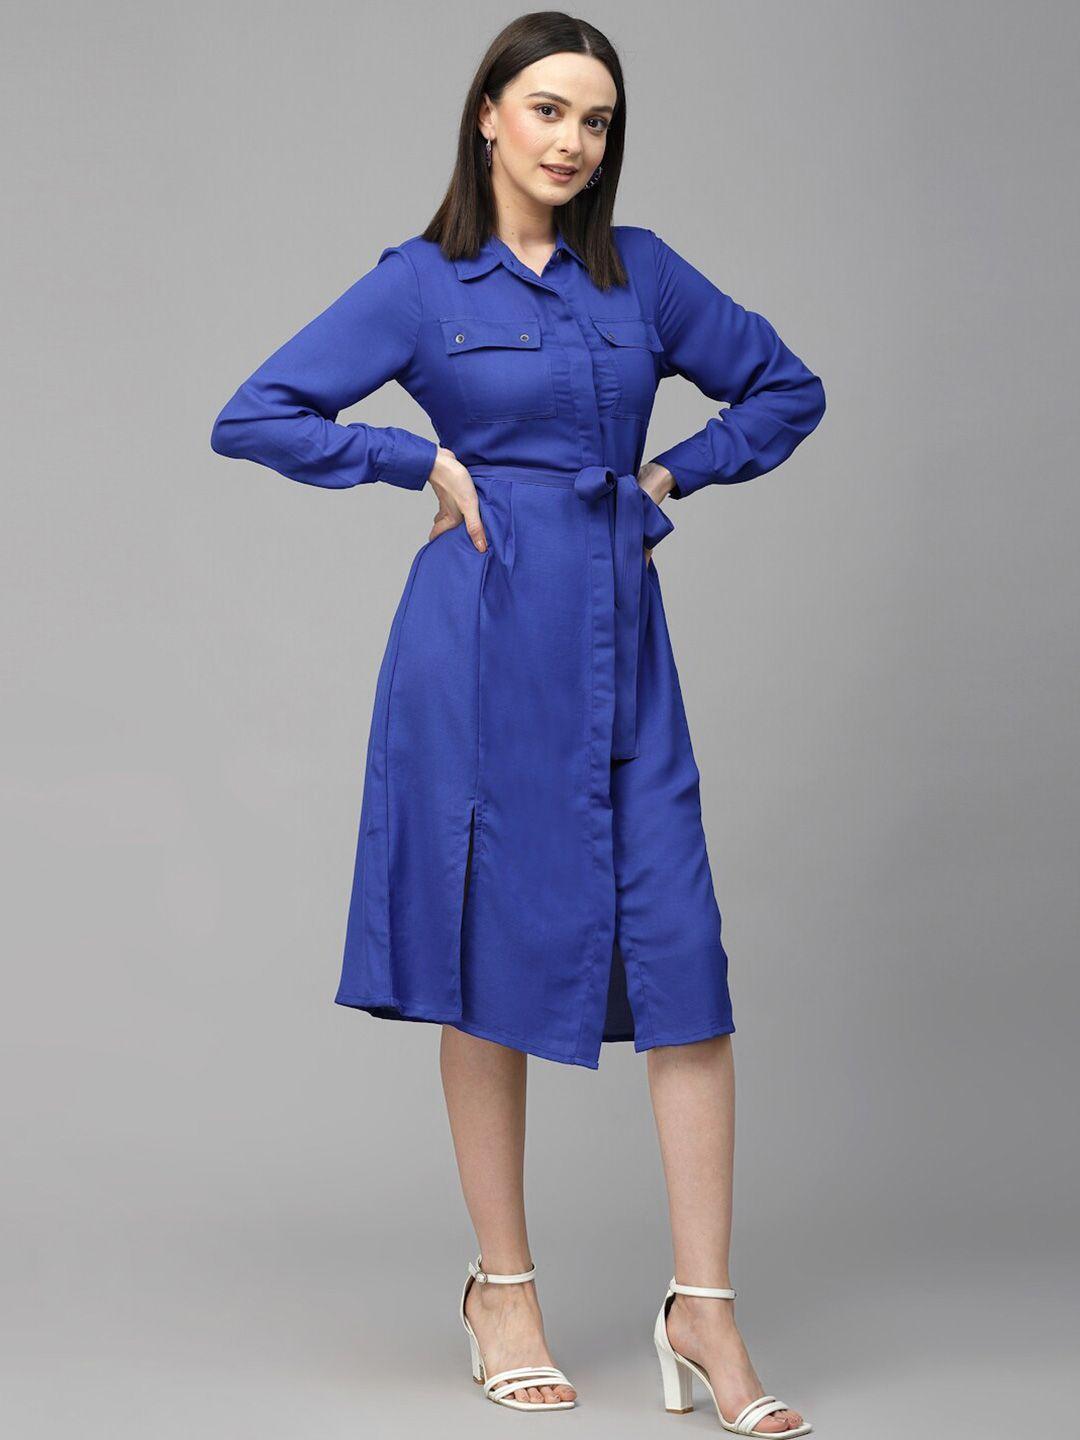 style quotient cuffed sleeves shirt midi dress with belt